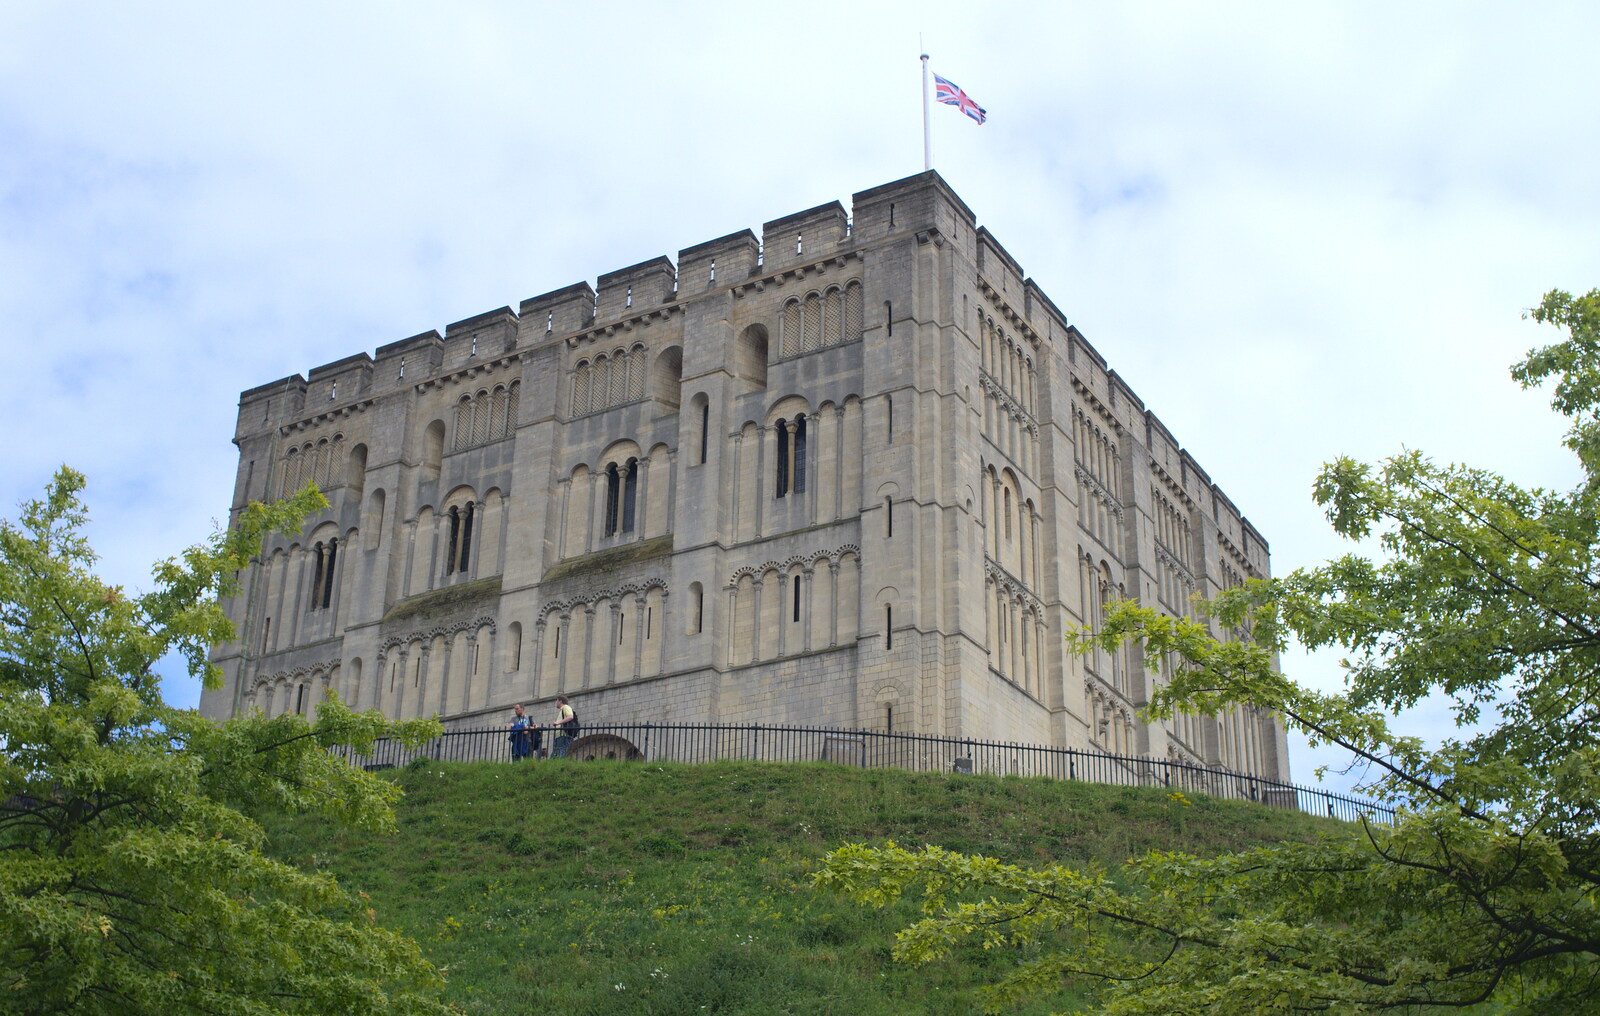 Norwich castle from Bill and Carmen's Paella Barbeque, and a Trip to the City, Yaxley and Norwich - 25th August 2012